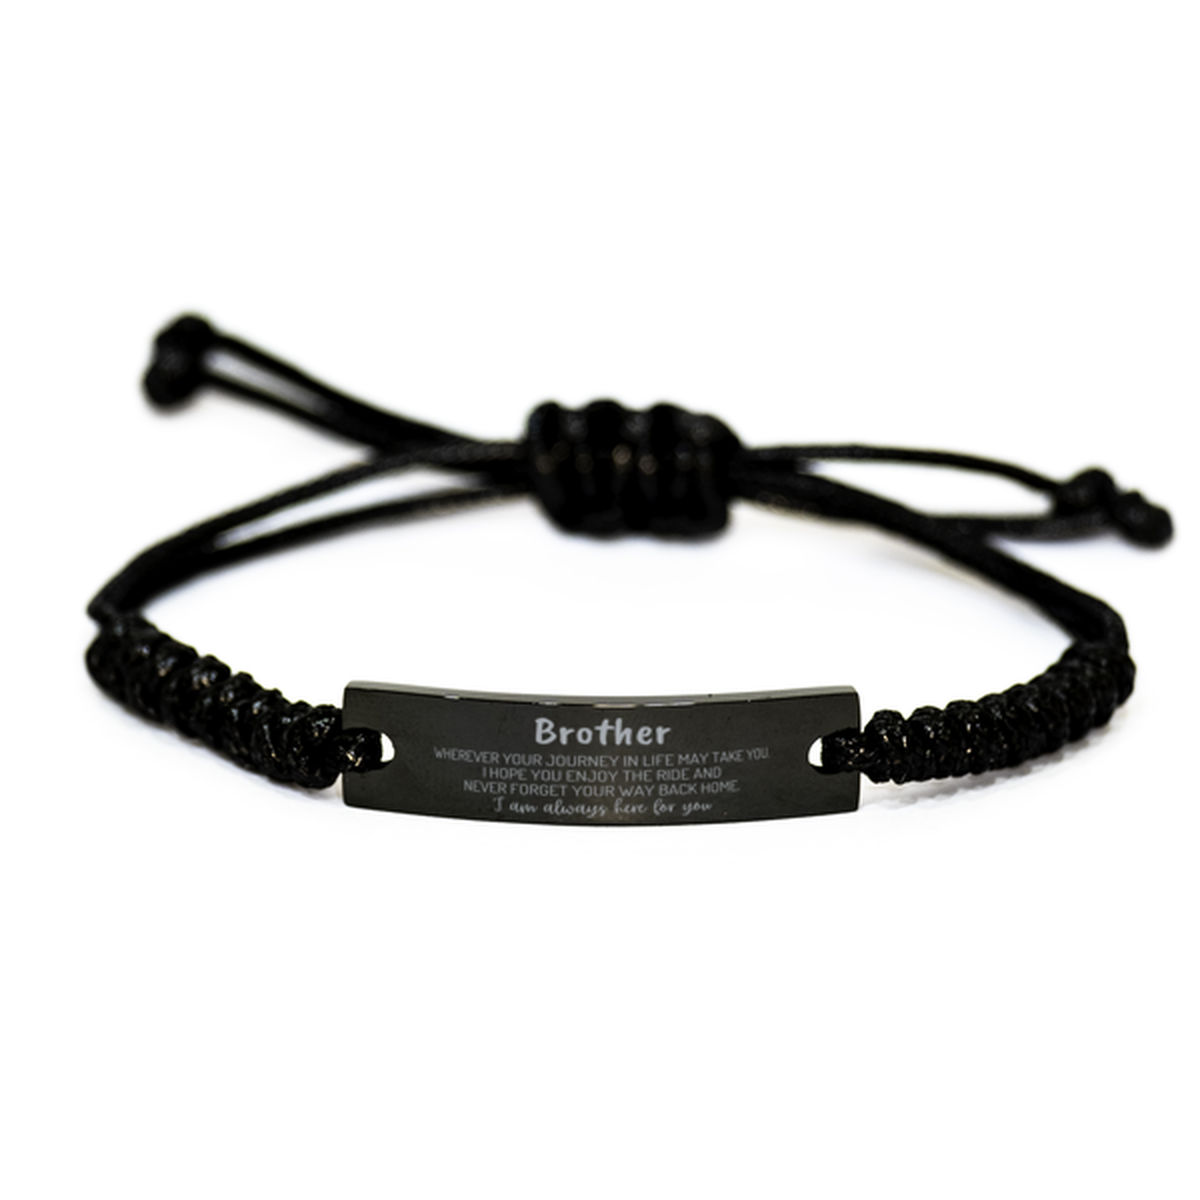 Brother wherever your journey in life may take you, I am always here for you Brother Black Rope Bracelet, Awesome Christmas Gifts For Brother, Brother Birthday Gifts for Men Women Family Loved One